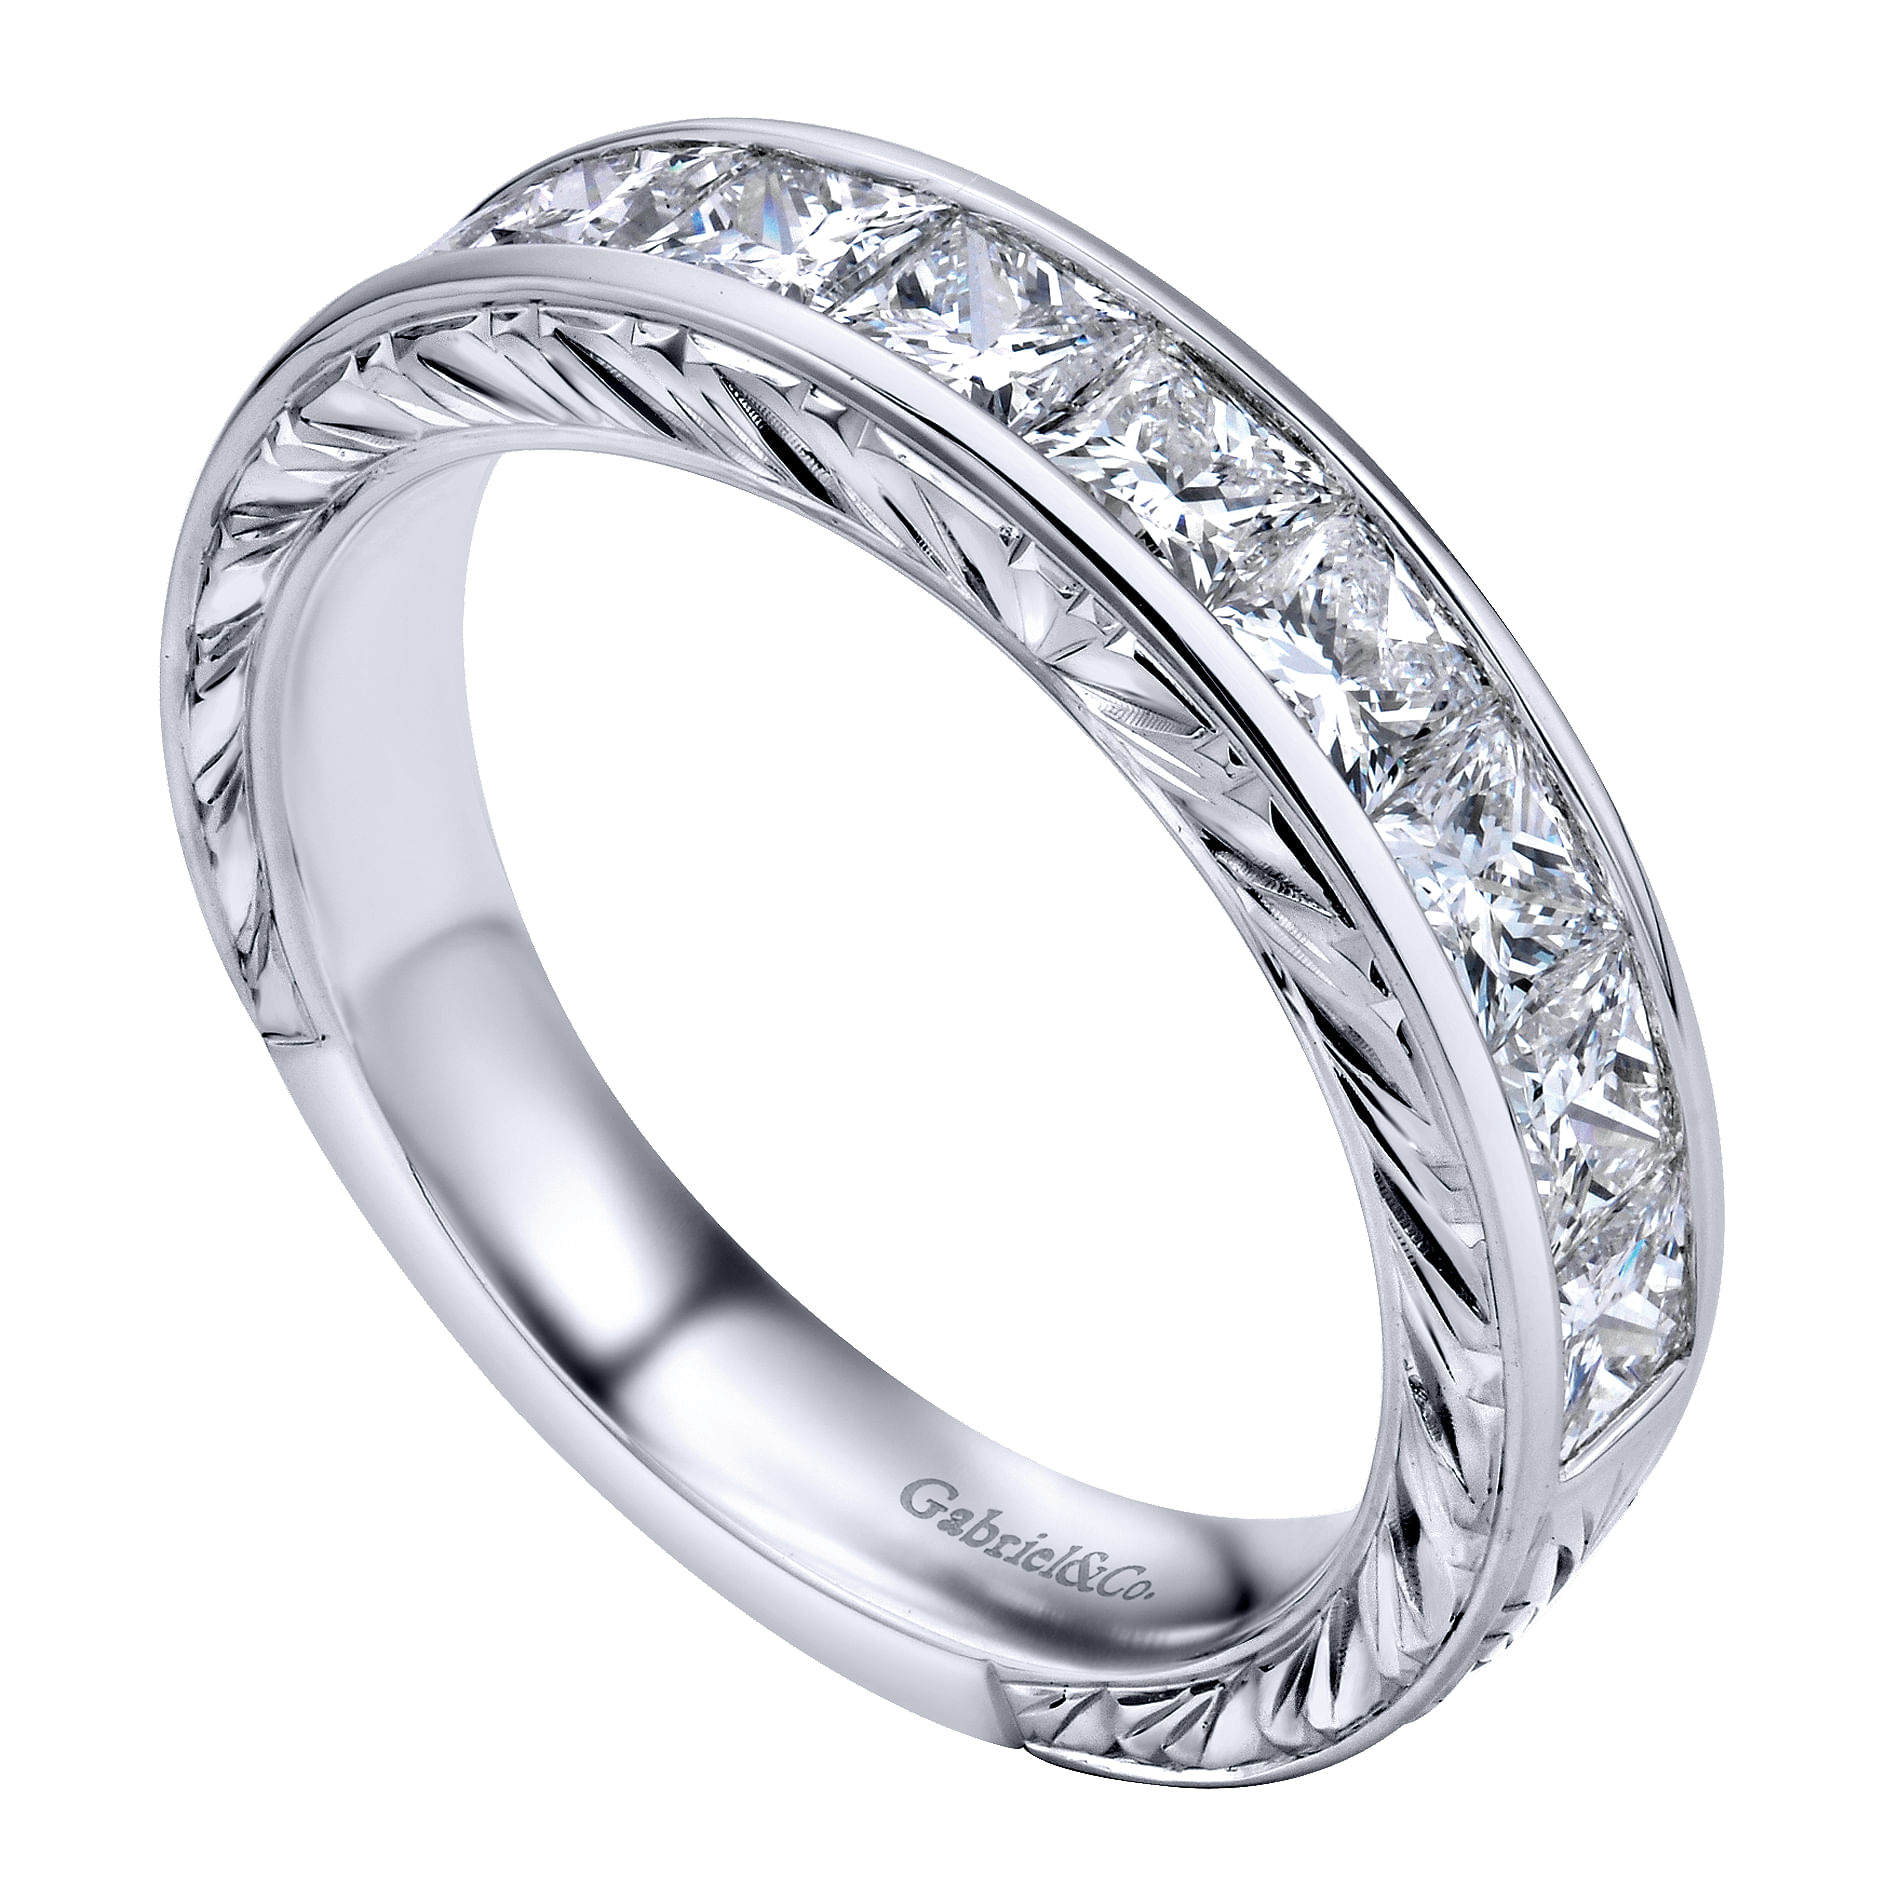 Cesaire - 14K White Gold Princess Cut 9 Stone Channel Set Diamond Wedding Band with Engraving - 1.5 ct - Shot 3